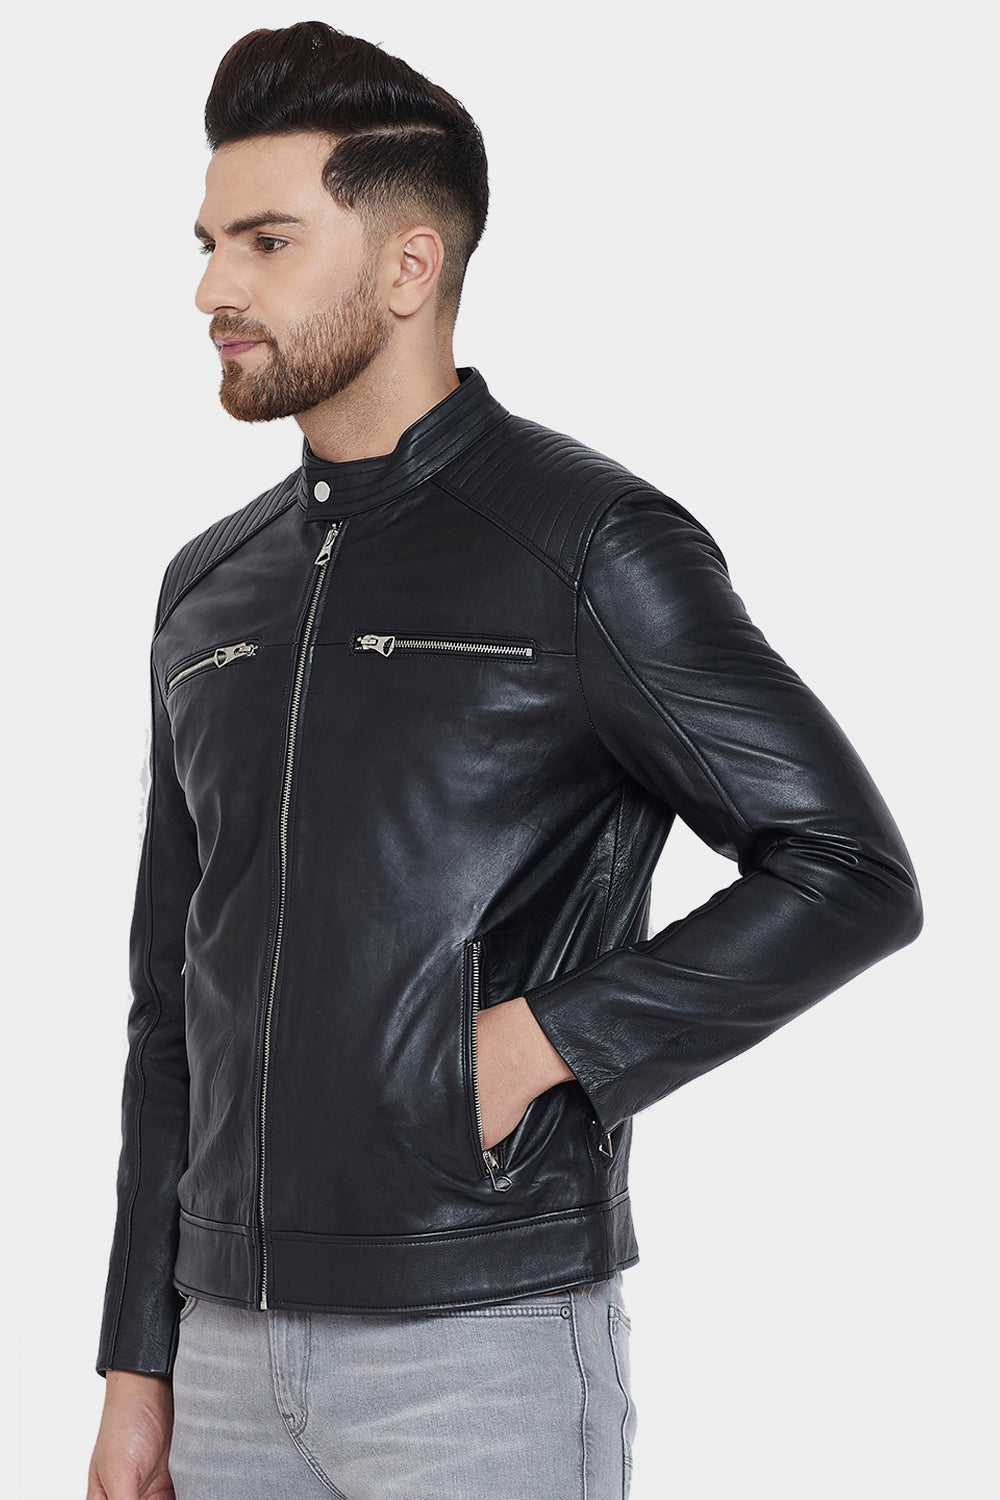 Justanned Real Leather Black Jacket